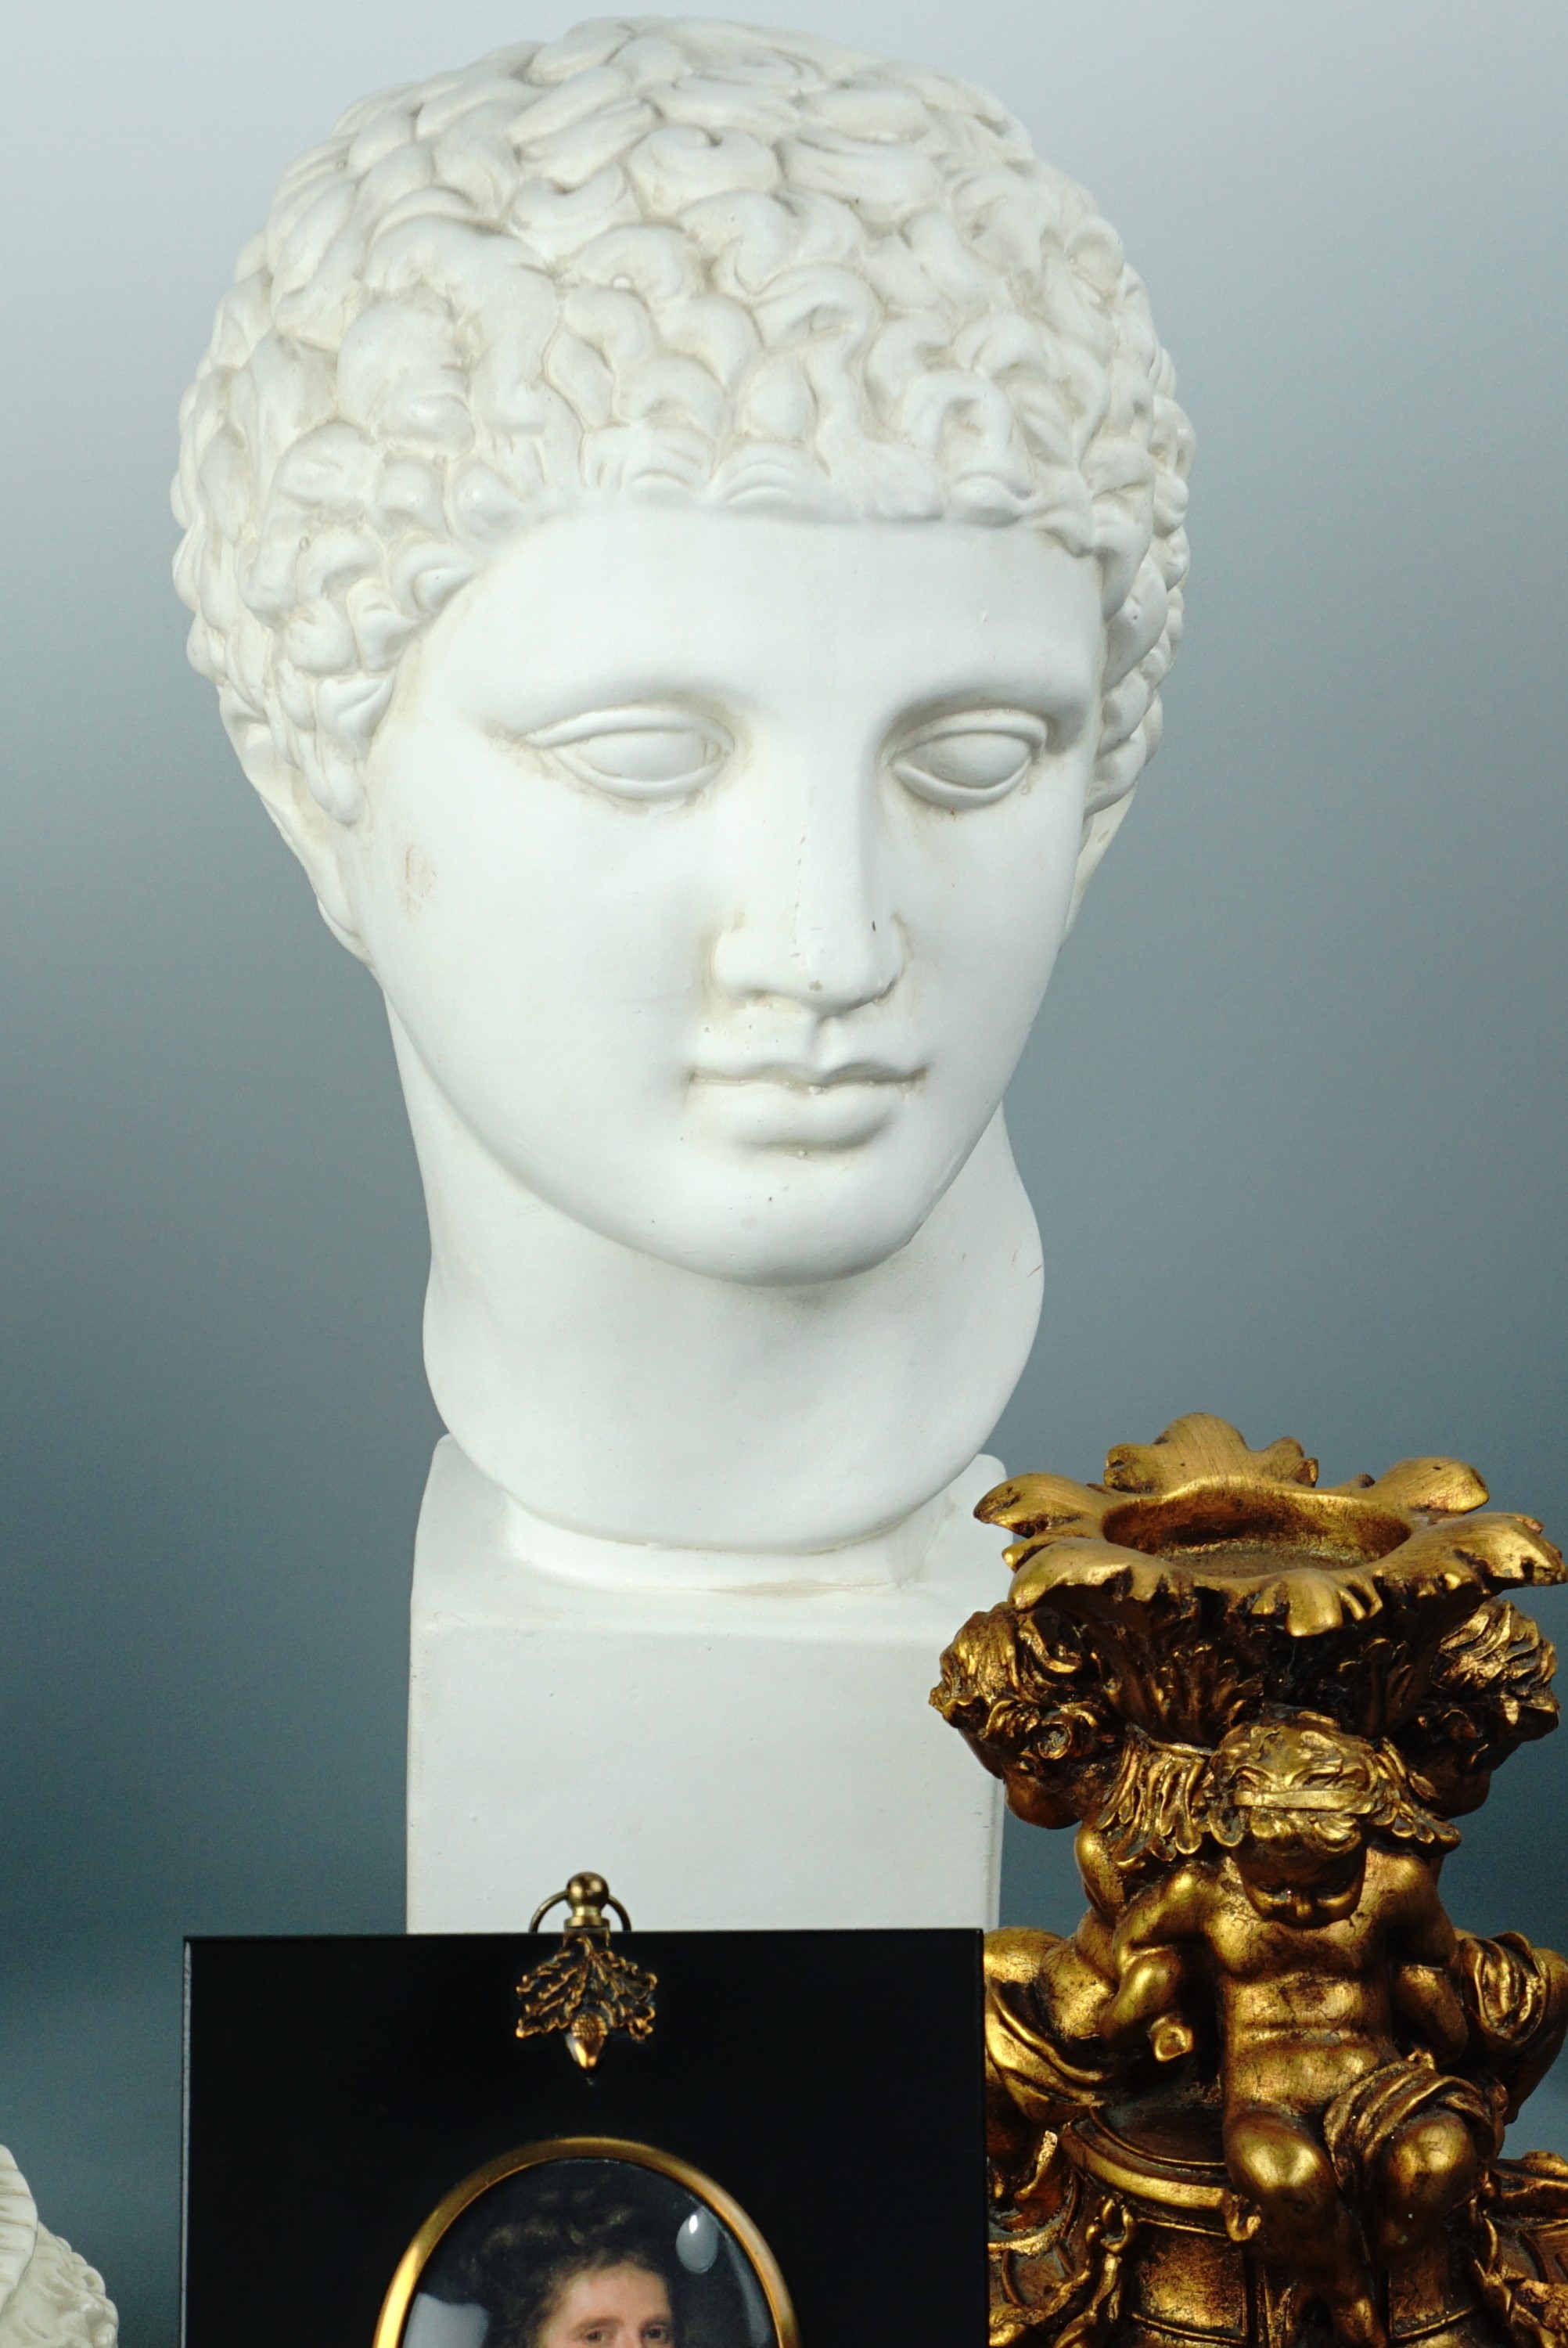 Contemporary decorative furnishing items including a reproduction classical bust, portrait - Image 3 of 5